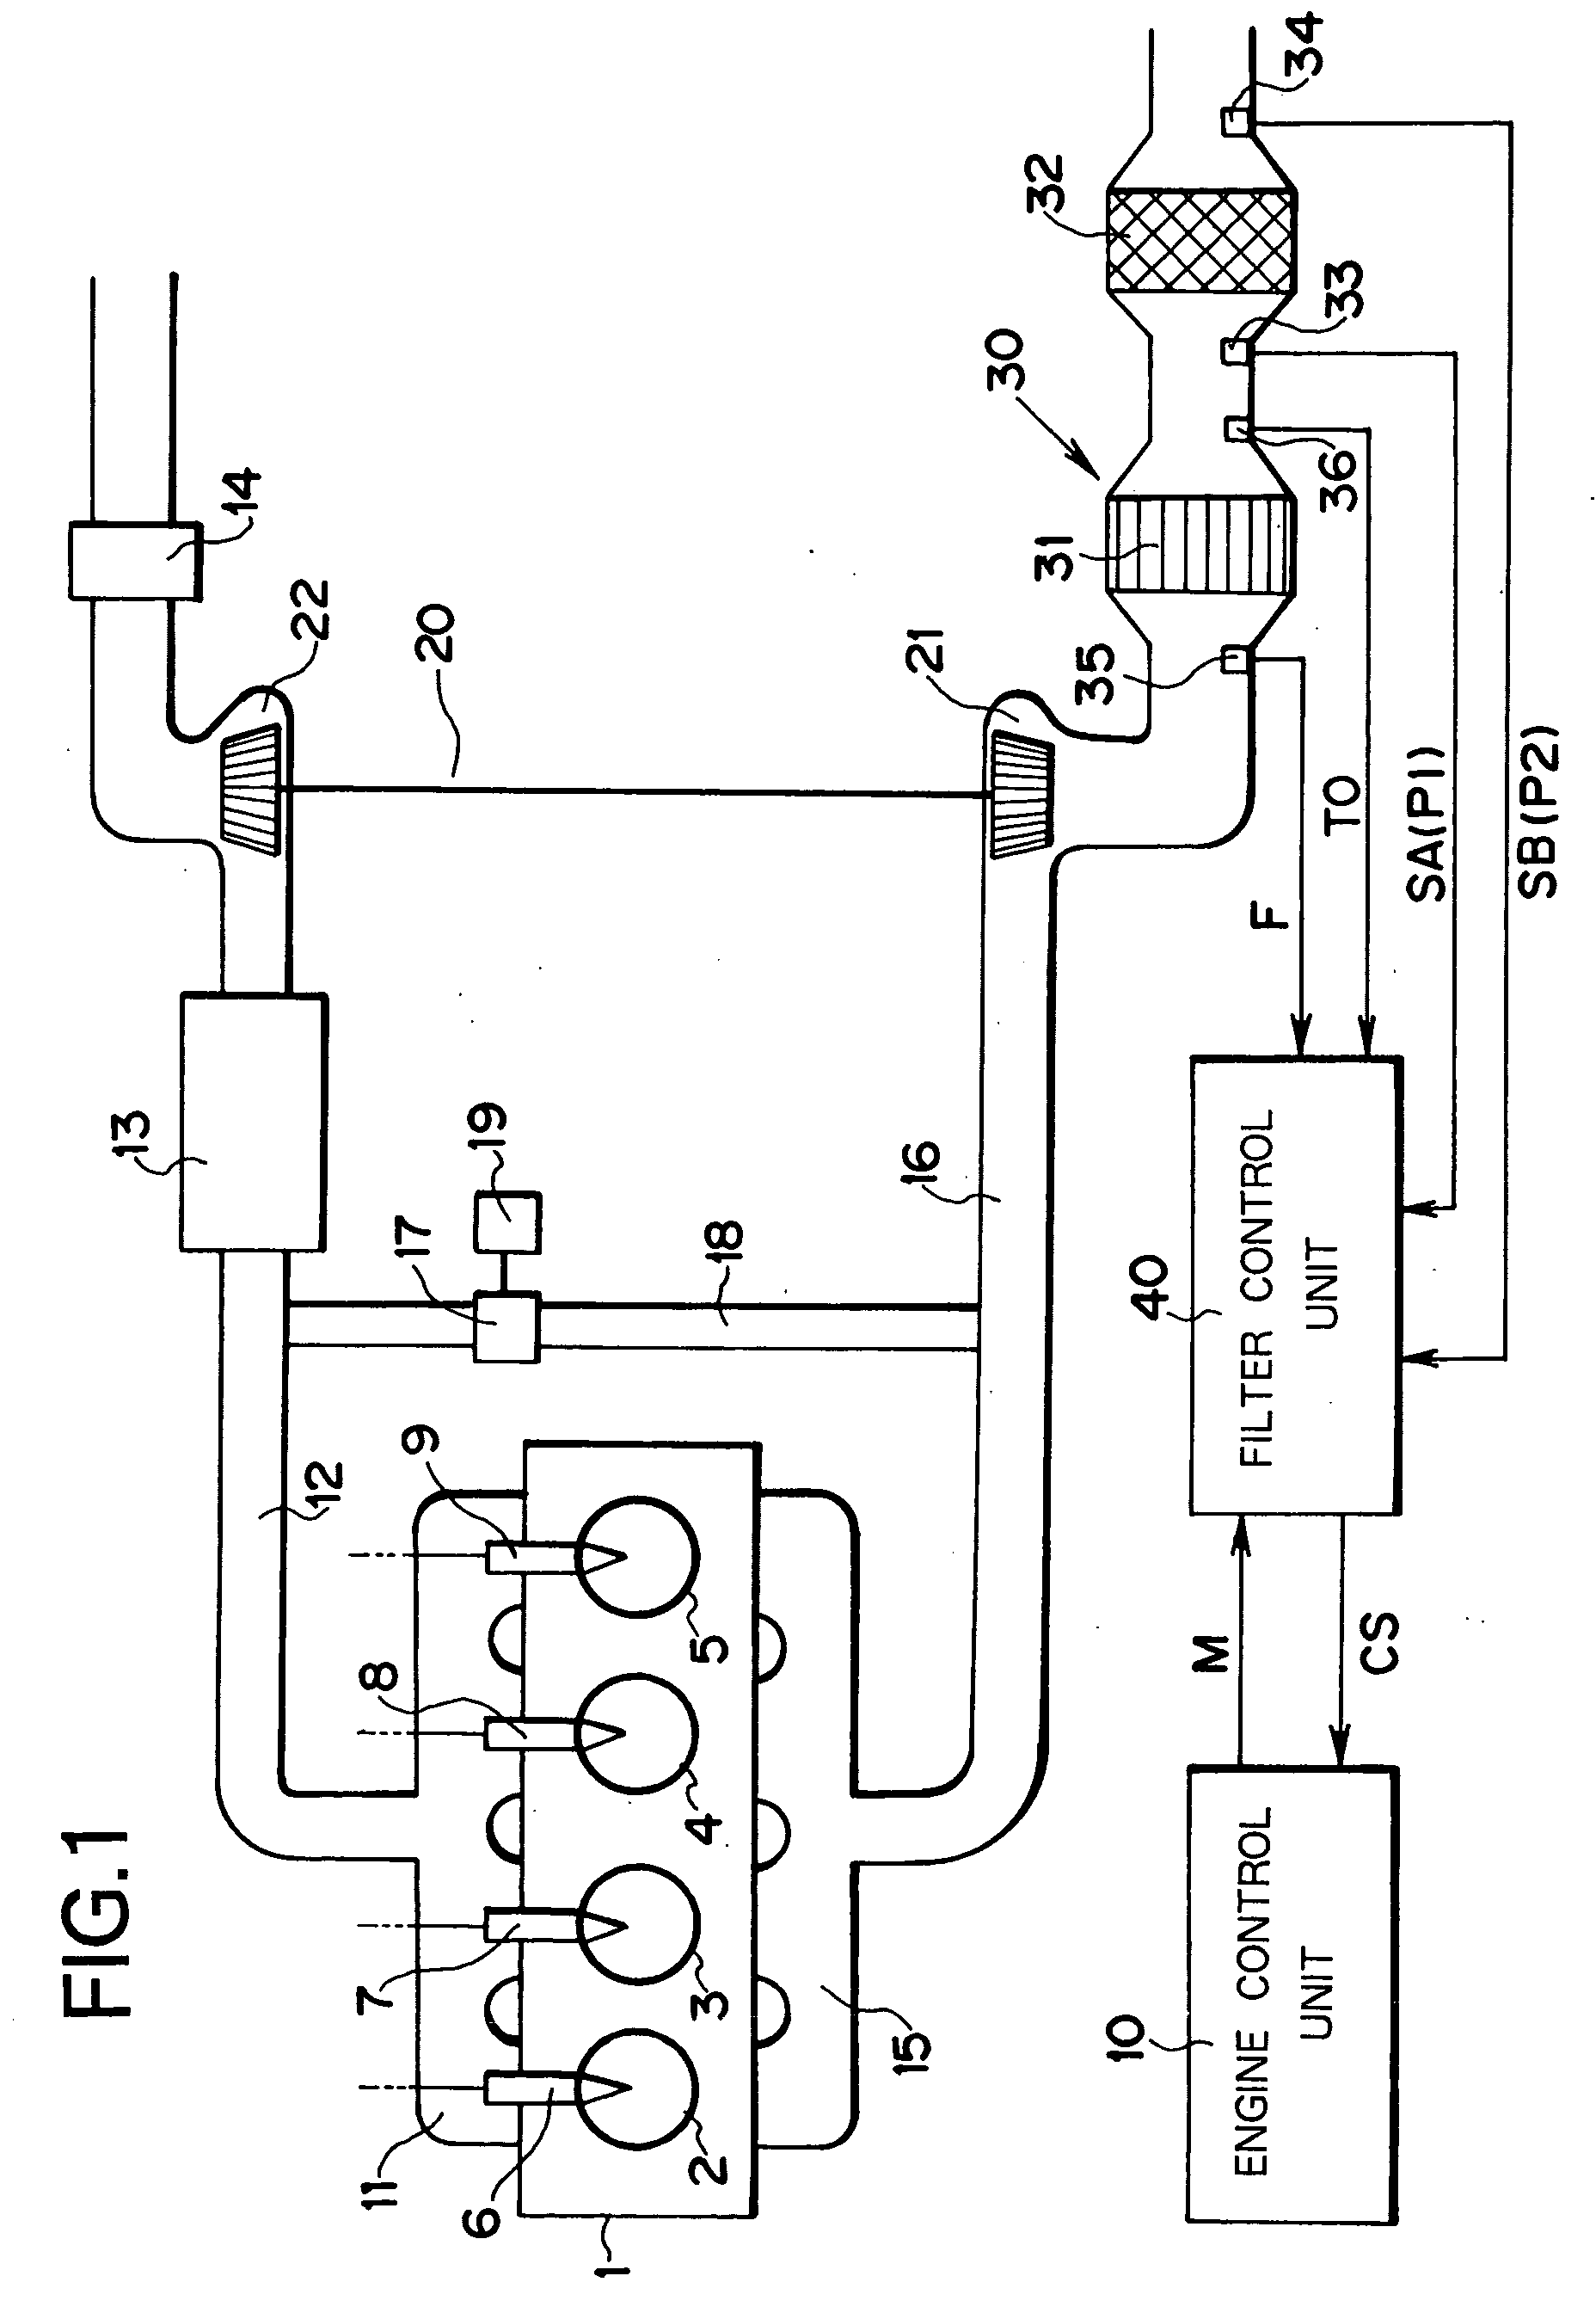 Filter control device